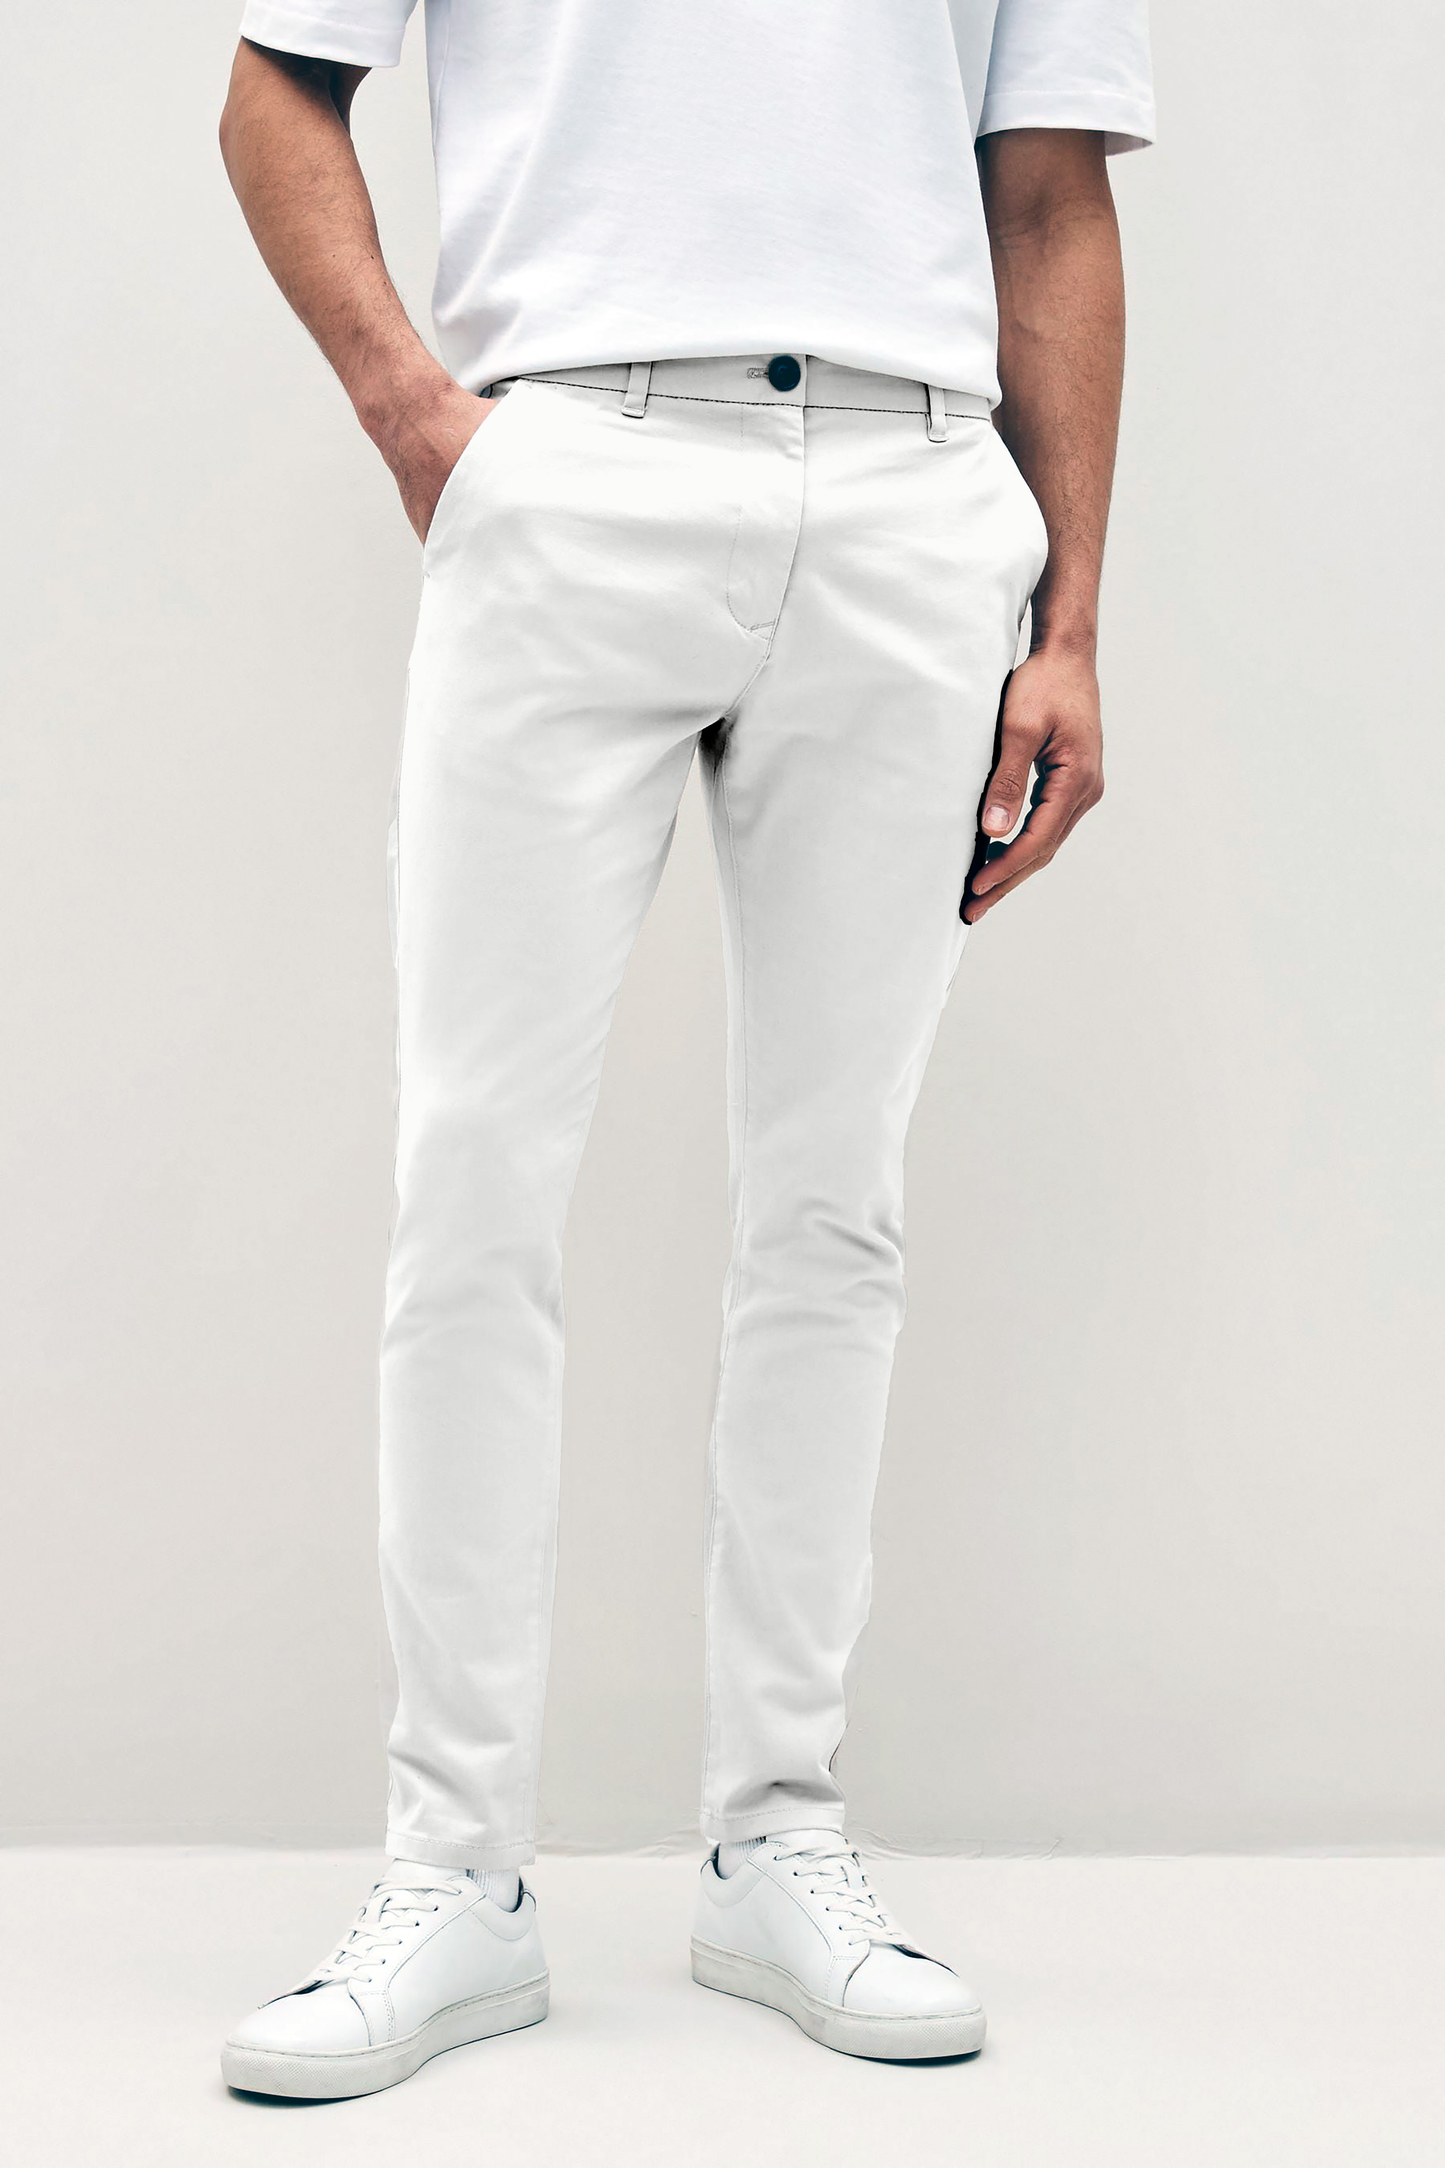 Mens white chinos with front slanted pockets, jetted back pockets. zip fly fastening and brown horne buttons on the waistband and back pockets, the fit is a slim fit, this is worn with a white tee and white unbranded trainers